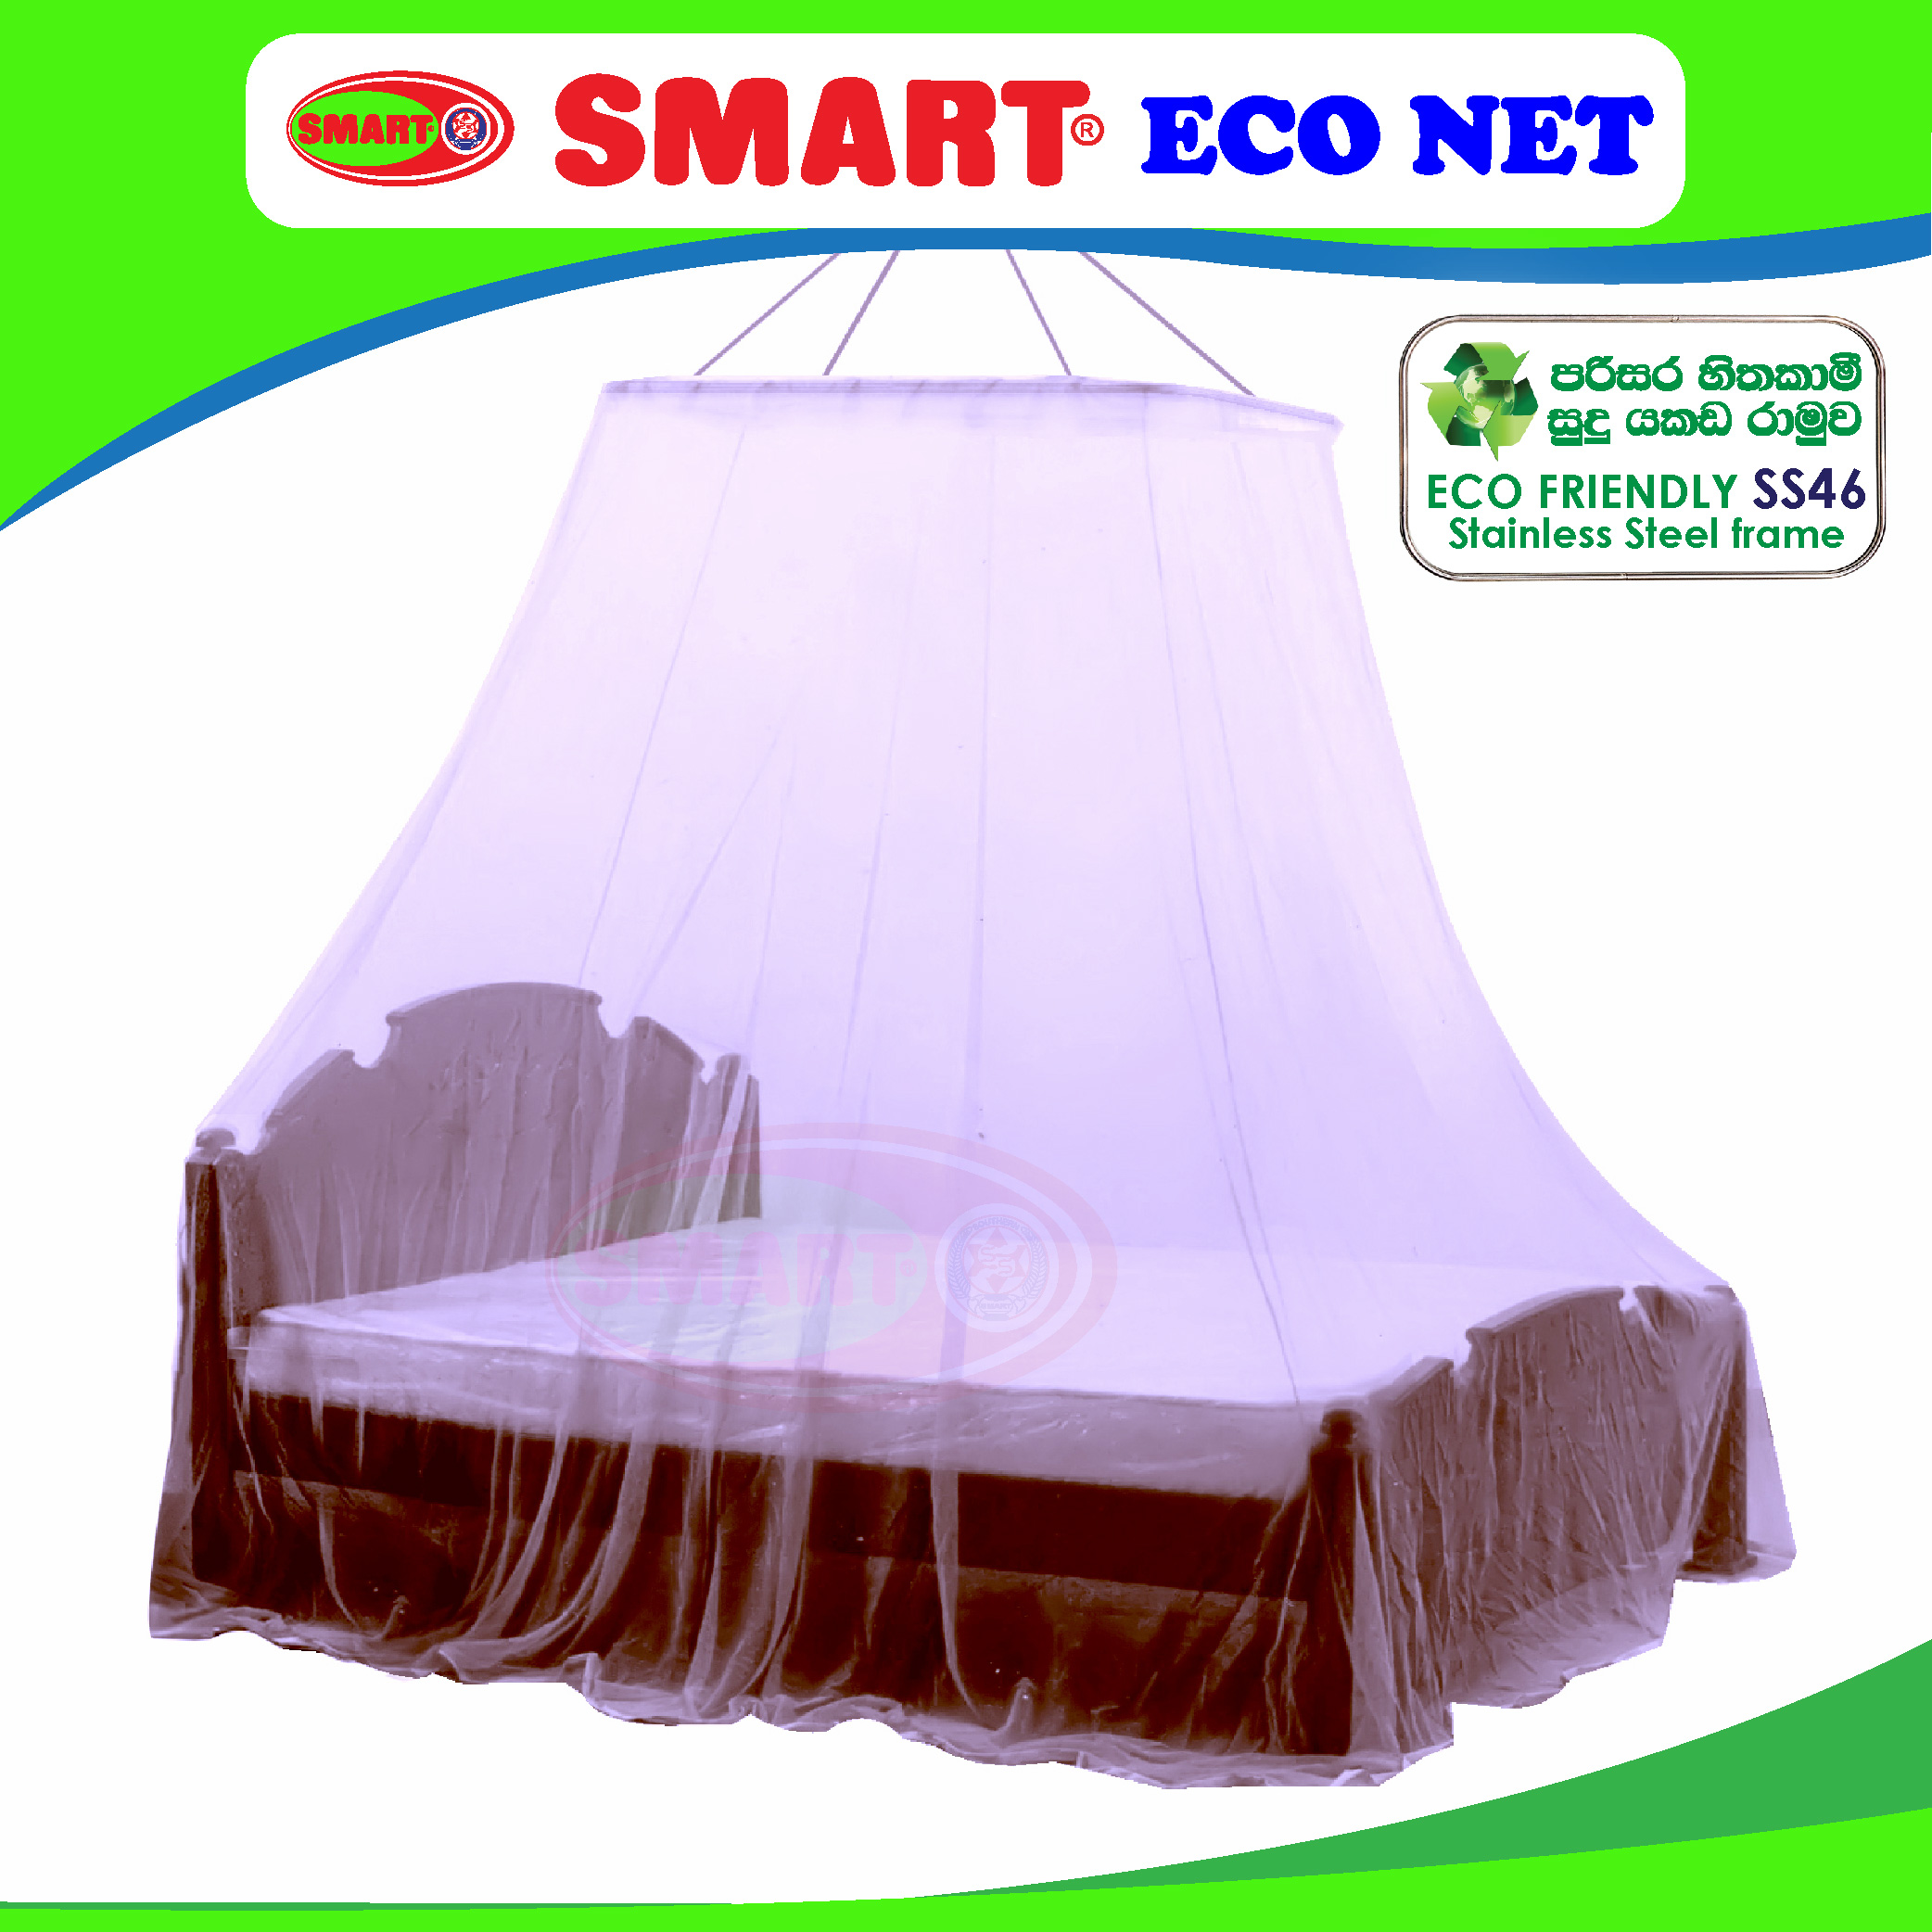 Smart Eco Mosquito Net - Double Bed (6' X 4') with Stainless Steel Reusable Frame #ED46